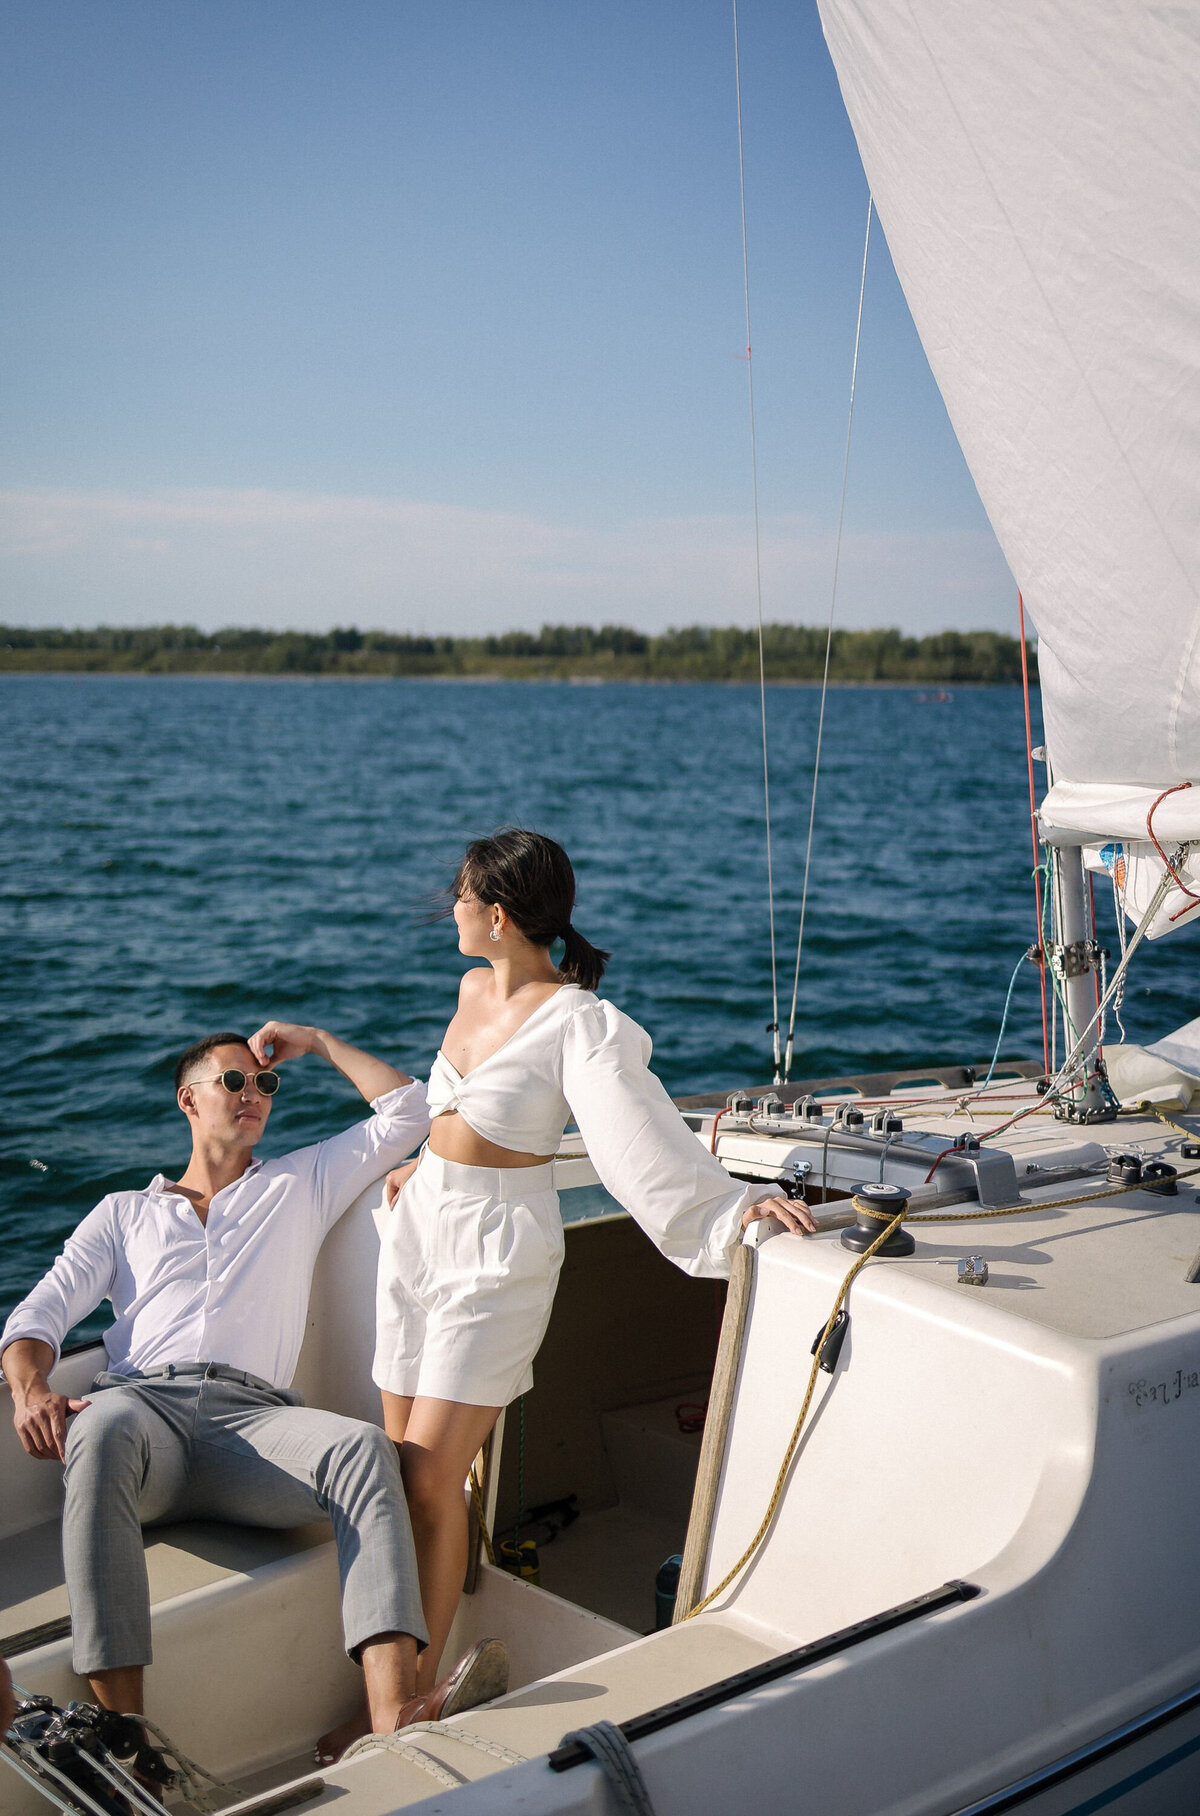 Stunning engagement session inspiration, couple on sailboat, OR Imagery, authentic and intimate wedding photographer in Calgary, Alberta. Featured on the Bronte Bride Vendor Guide.